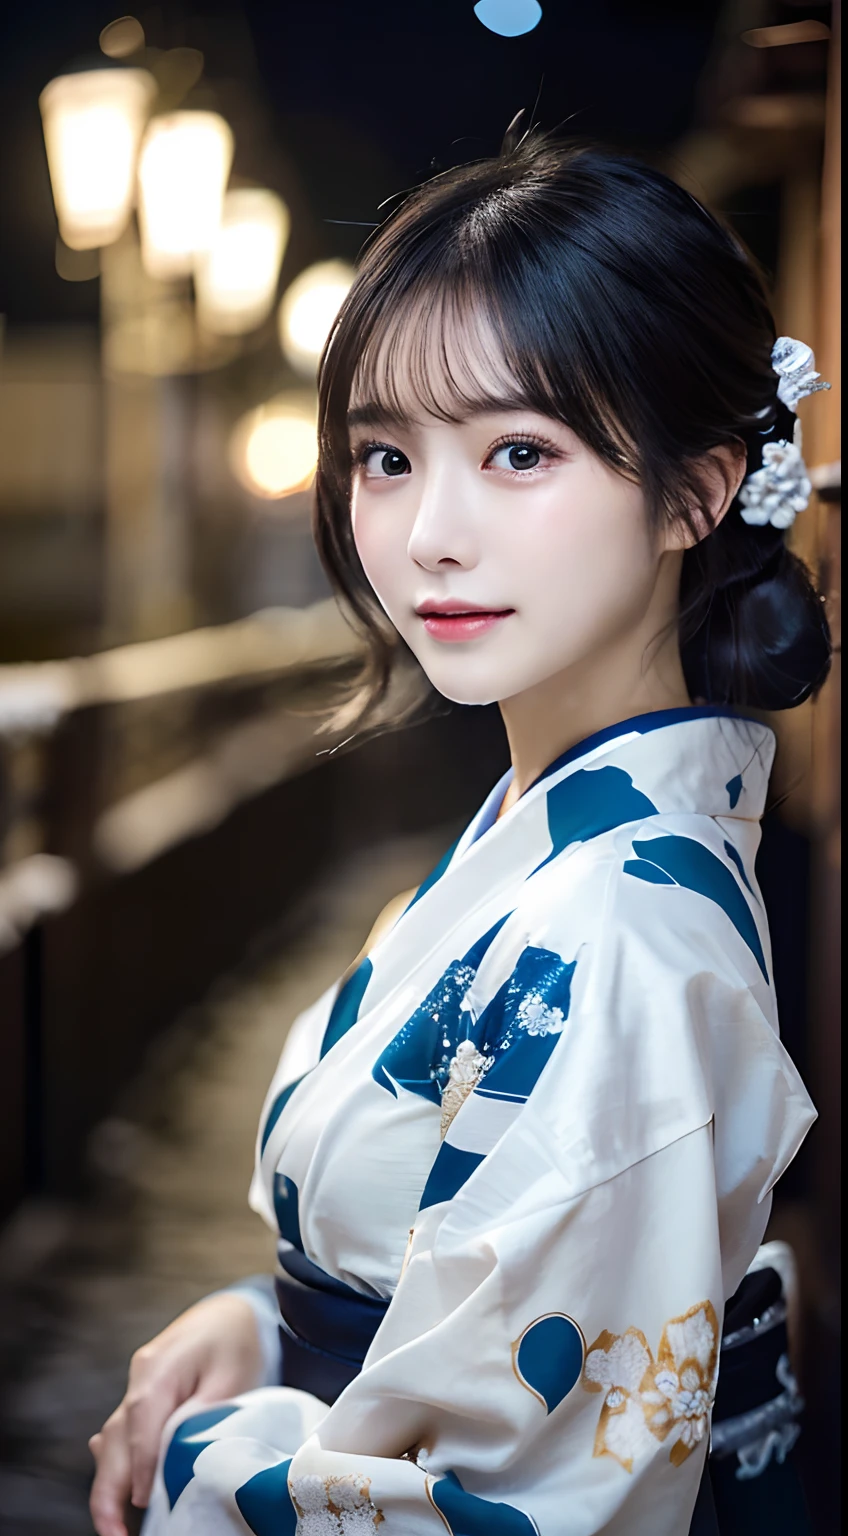 (Kimono)、(top-quality,​masterpiece:1.3,超A high resolution,),(ultra-detailliert,Caustics),(Photorealsitic:1.4,RAW shooting,)Ultra-realistic capture,A highly detailed,high-definition16Kfor human skin、 Skin texture is natural、、The skin looks healthy with an even tone、 Use natural light and color,One Woman,japanes,,kawaii,A dark-haired,Middle hair,(depth of fields、chromatic abberation、、Wide range of lighting、Natural Shading、)、(Exterior light at night:1.4)、(Falling snow:1.2)、(Hair swaying in the wind:1.1)、(Light reflecting snow:1.2)